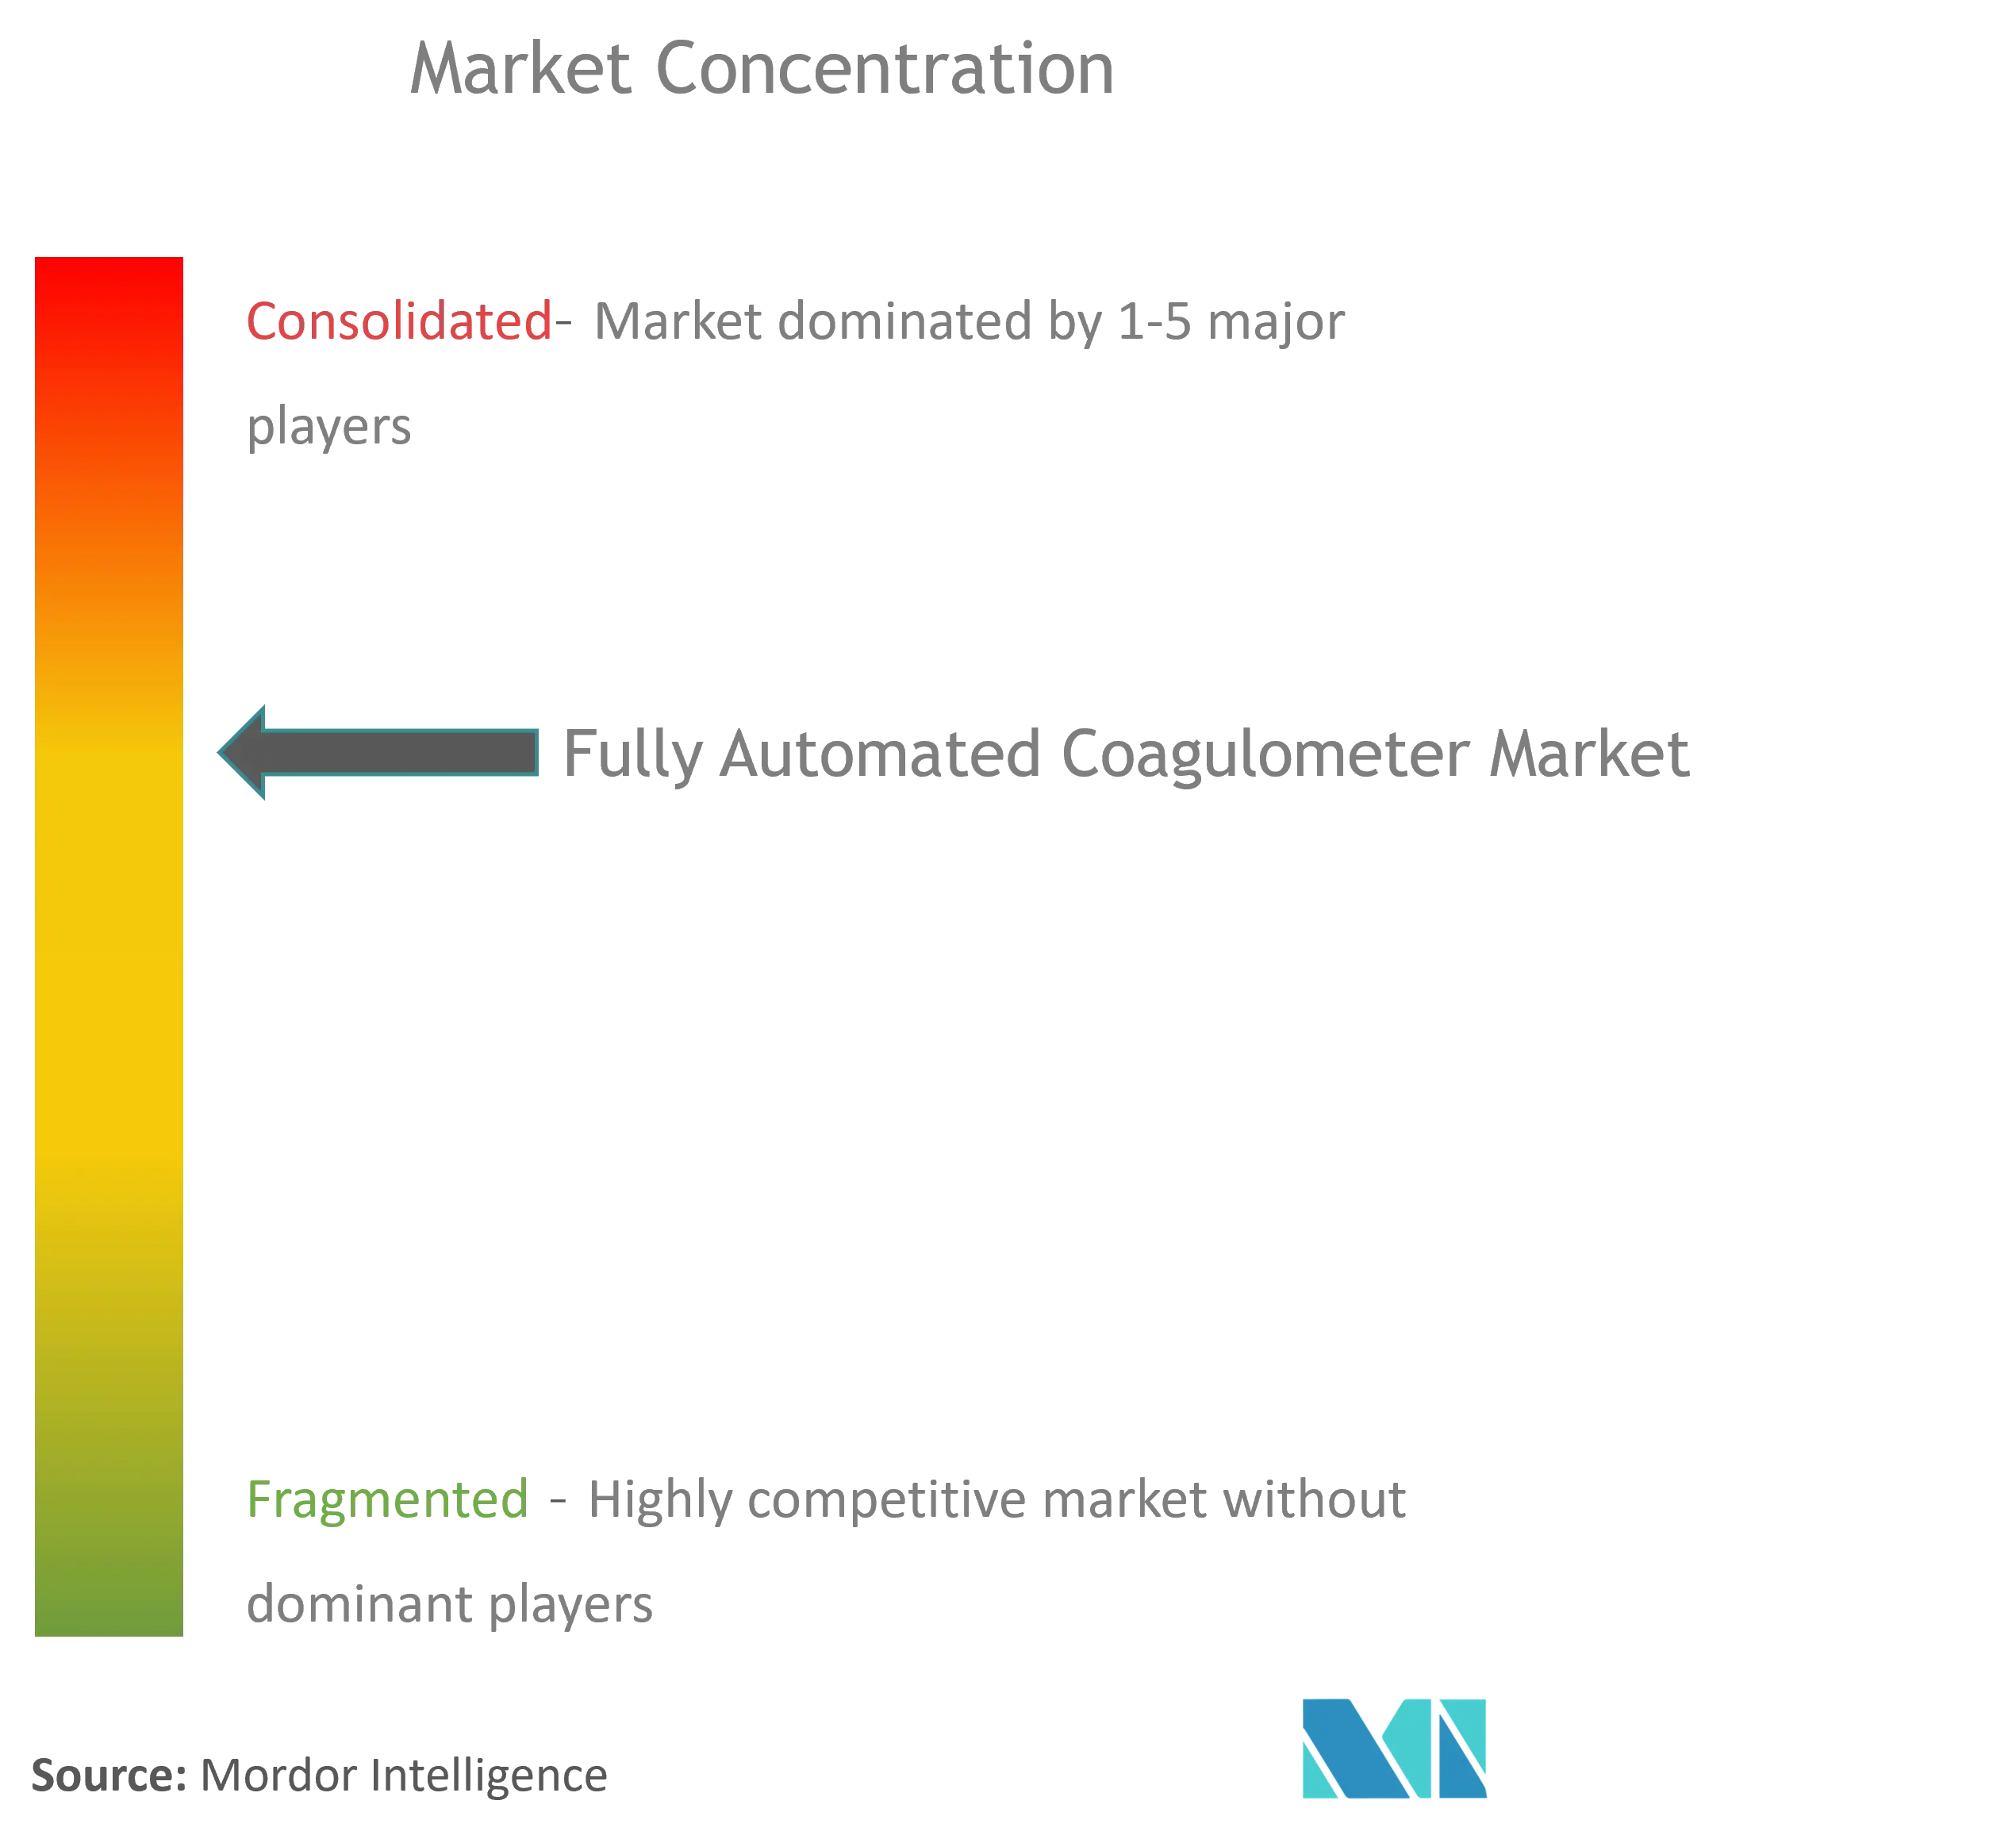 Fully Automated Coagulometer Market Concentration